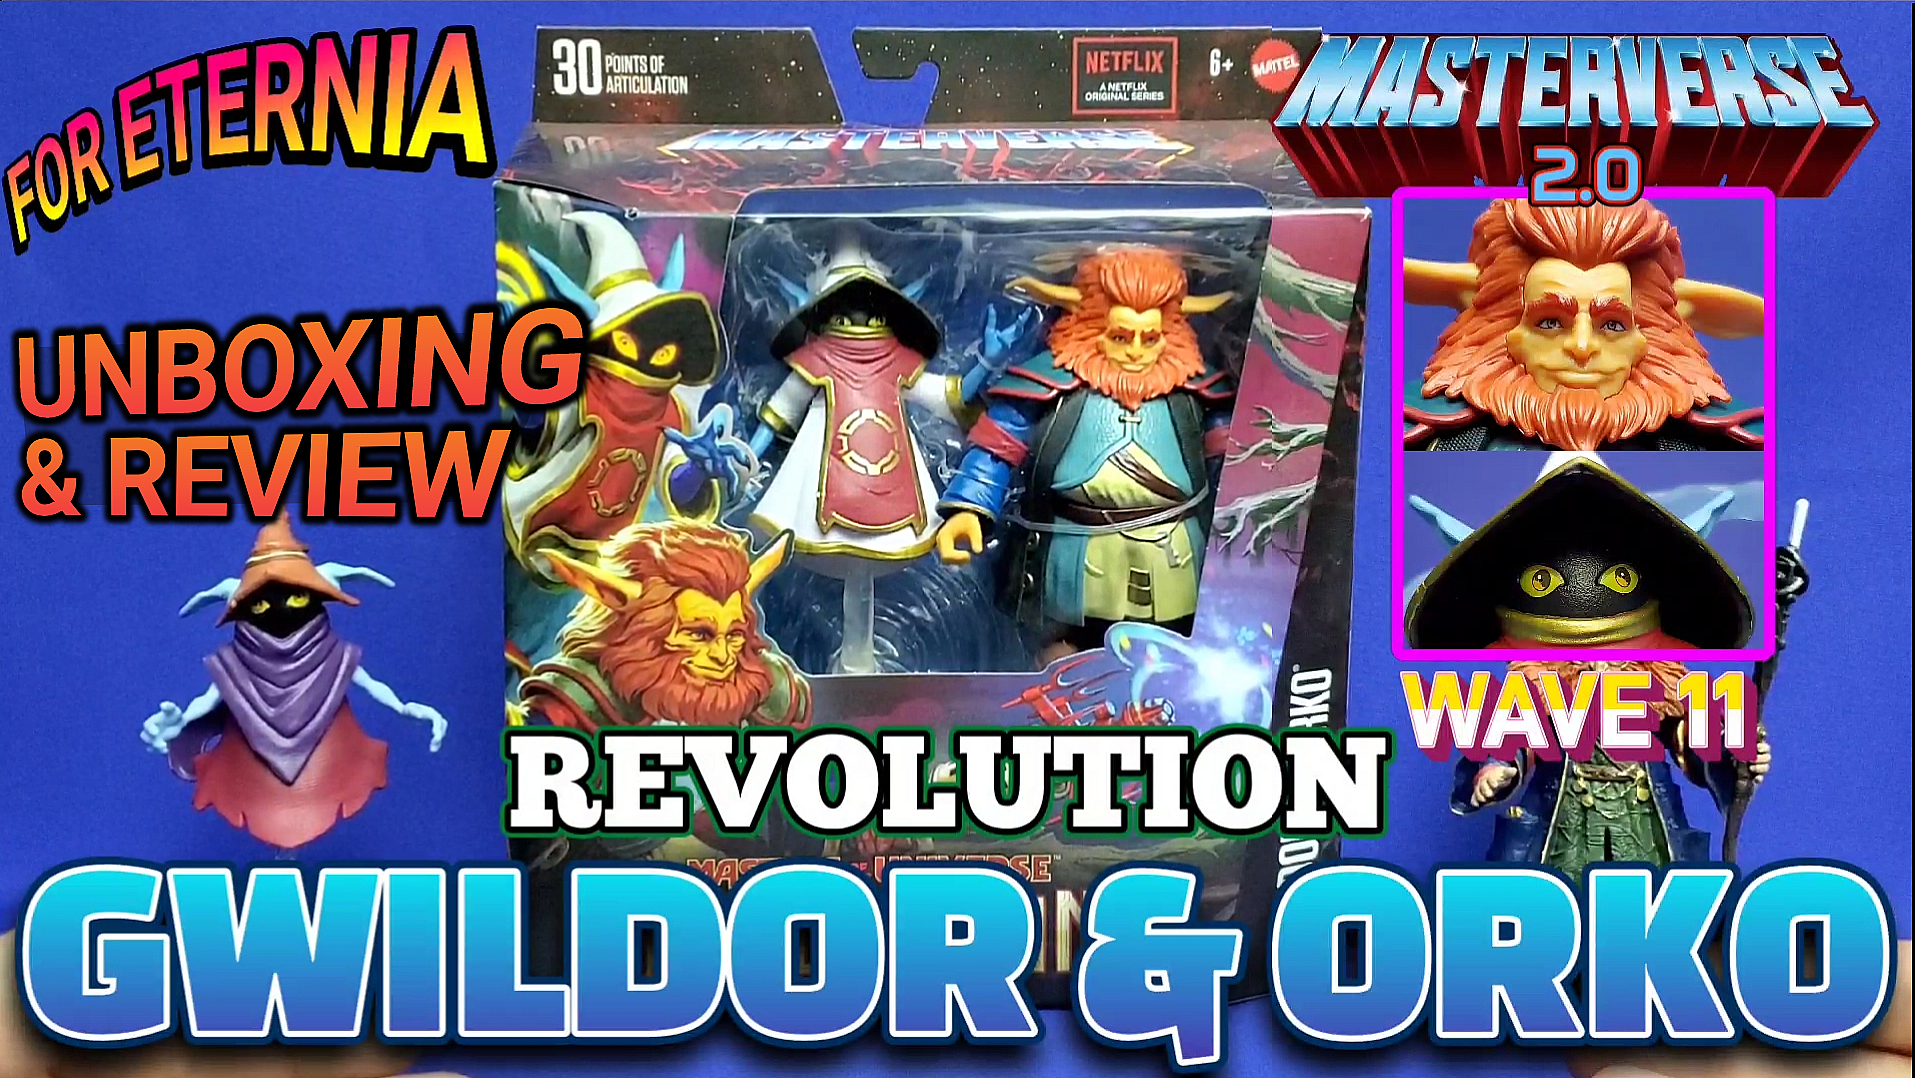 UNBOXING & REVIEWING the Masterverse GWILDOR & ORKO ”Masters of the Universe: Revolution” Action Figure 2-Pack